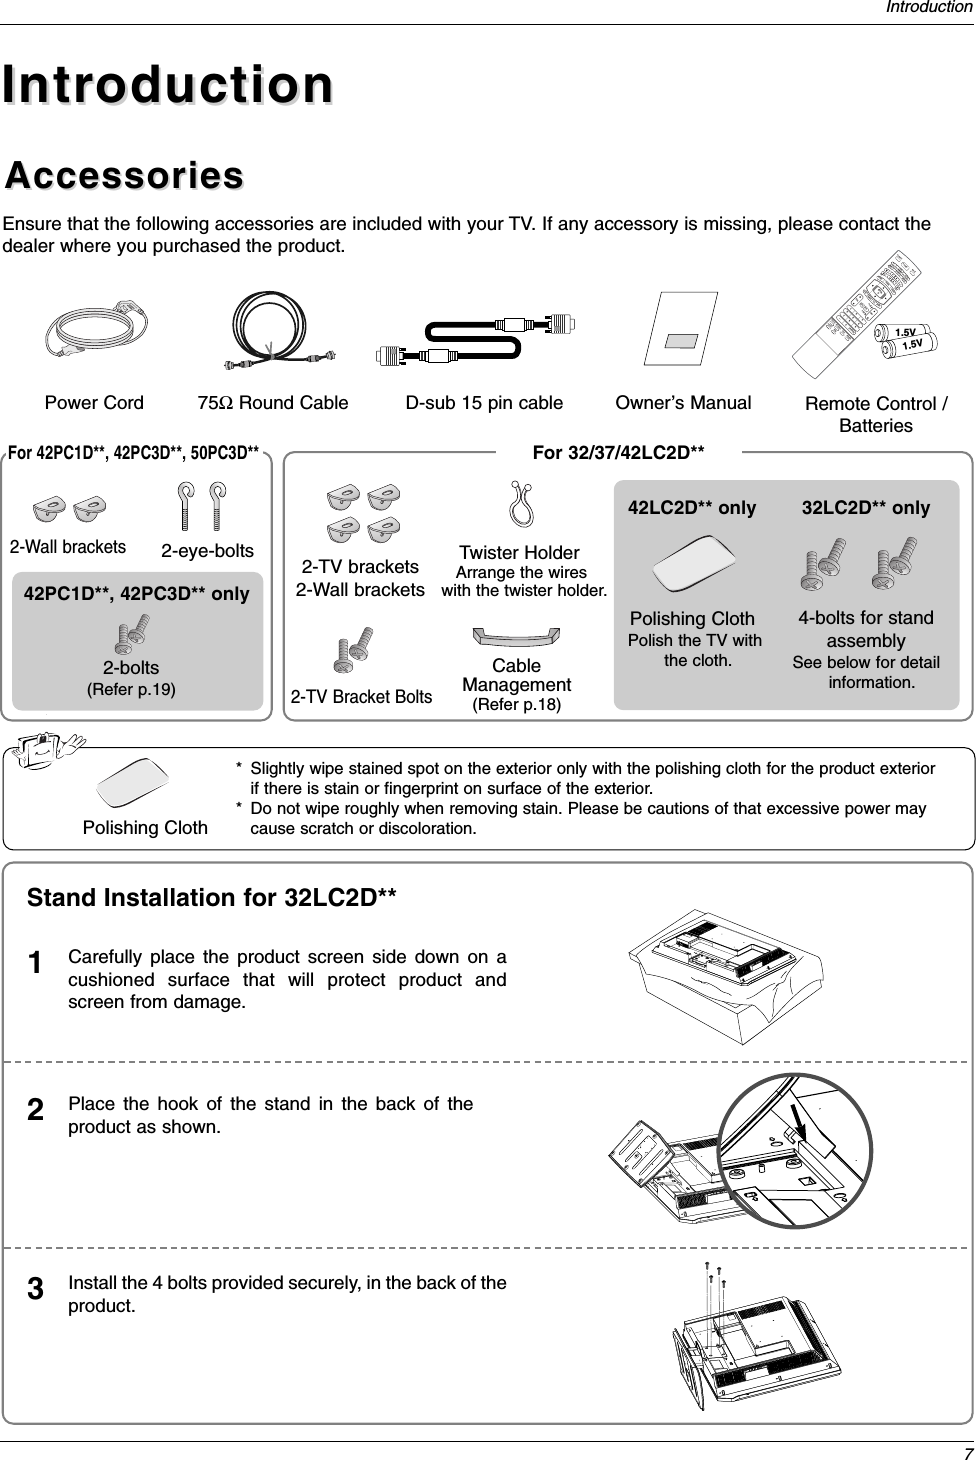 7IntroductionAccessoriesAccessoriesIntroductionIntroductionOwner’s Manual75ΩRound CablePower CordEnsure that the following accessories are included with your TV. If any accessory is missing, please contact thedealer where you purchased the product.1.5V1.5VVOLFLASHBKCH1 2 3     456    7809   APMADJUSTSAPEZ SOUNDEZ PICFREEZEDAY -GUIDMENUMUTEPAGEPAGEFAVEXITTIMERCCINFOENTERVOLCHPOWER123     456    7809   MENUMUTE FAVDAY -GUIDEDAY+RATIOVCRTVDVDENTERAPMADJUSTSAPEZ SOUNDEZ PICFREEZEFLASHBKPAGEPAGEEXITTIMERCCINFOAUDIOCABLESTBMODETV INPUT INPUTRemote Control /BatteriesD-sub 15 pin cable2-eye-bolts 2-TV brackets2-Wall brackets2-TV Bracket BoltsFor 32/37/42LC2D**For 42PC1D**, 42PC3D**, 50PC3D**Carefully place the product screen side down on acushioned surface that will protect product andscreen from damage.1Place the hook of the stand in the back of theproduct as shown.2Install the 4 bolts provided securely, in the back of theproduct.3Stand Installation for 32LC2D**Twister HolderArrange the wires with the twister holder.4-bolts for standassemblySee below for detailinformation.32LC2D** only42LC2D** onlyCableManagement(Refer p.18)Polishing ClothPolish the TV withthe cloth.42PC1D**, 42PC3D** only2-Wall brackets2-bolts(Refer p.19)Polishing Cloth* Slightly wipe stained spot on the exterior only with the polishing cloth for the product exteriorif there is stain or fingerprint on surface of the exterior.* Do not wipe roughly when removing stain. Please be cautions of that excessive power maycause scratch or discoloration.